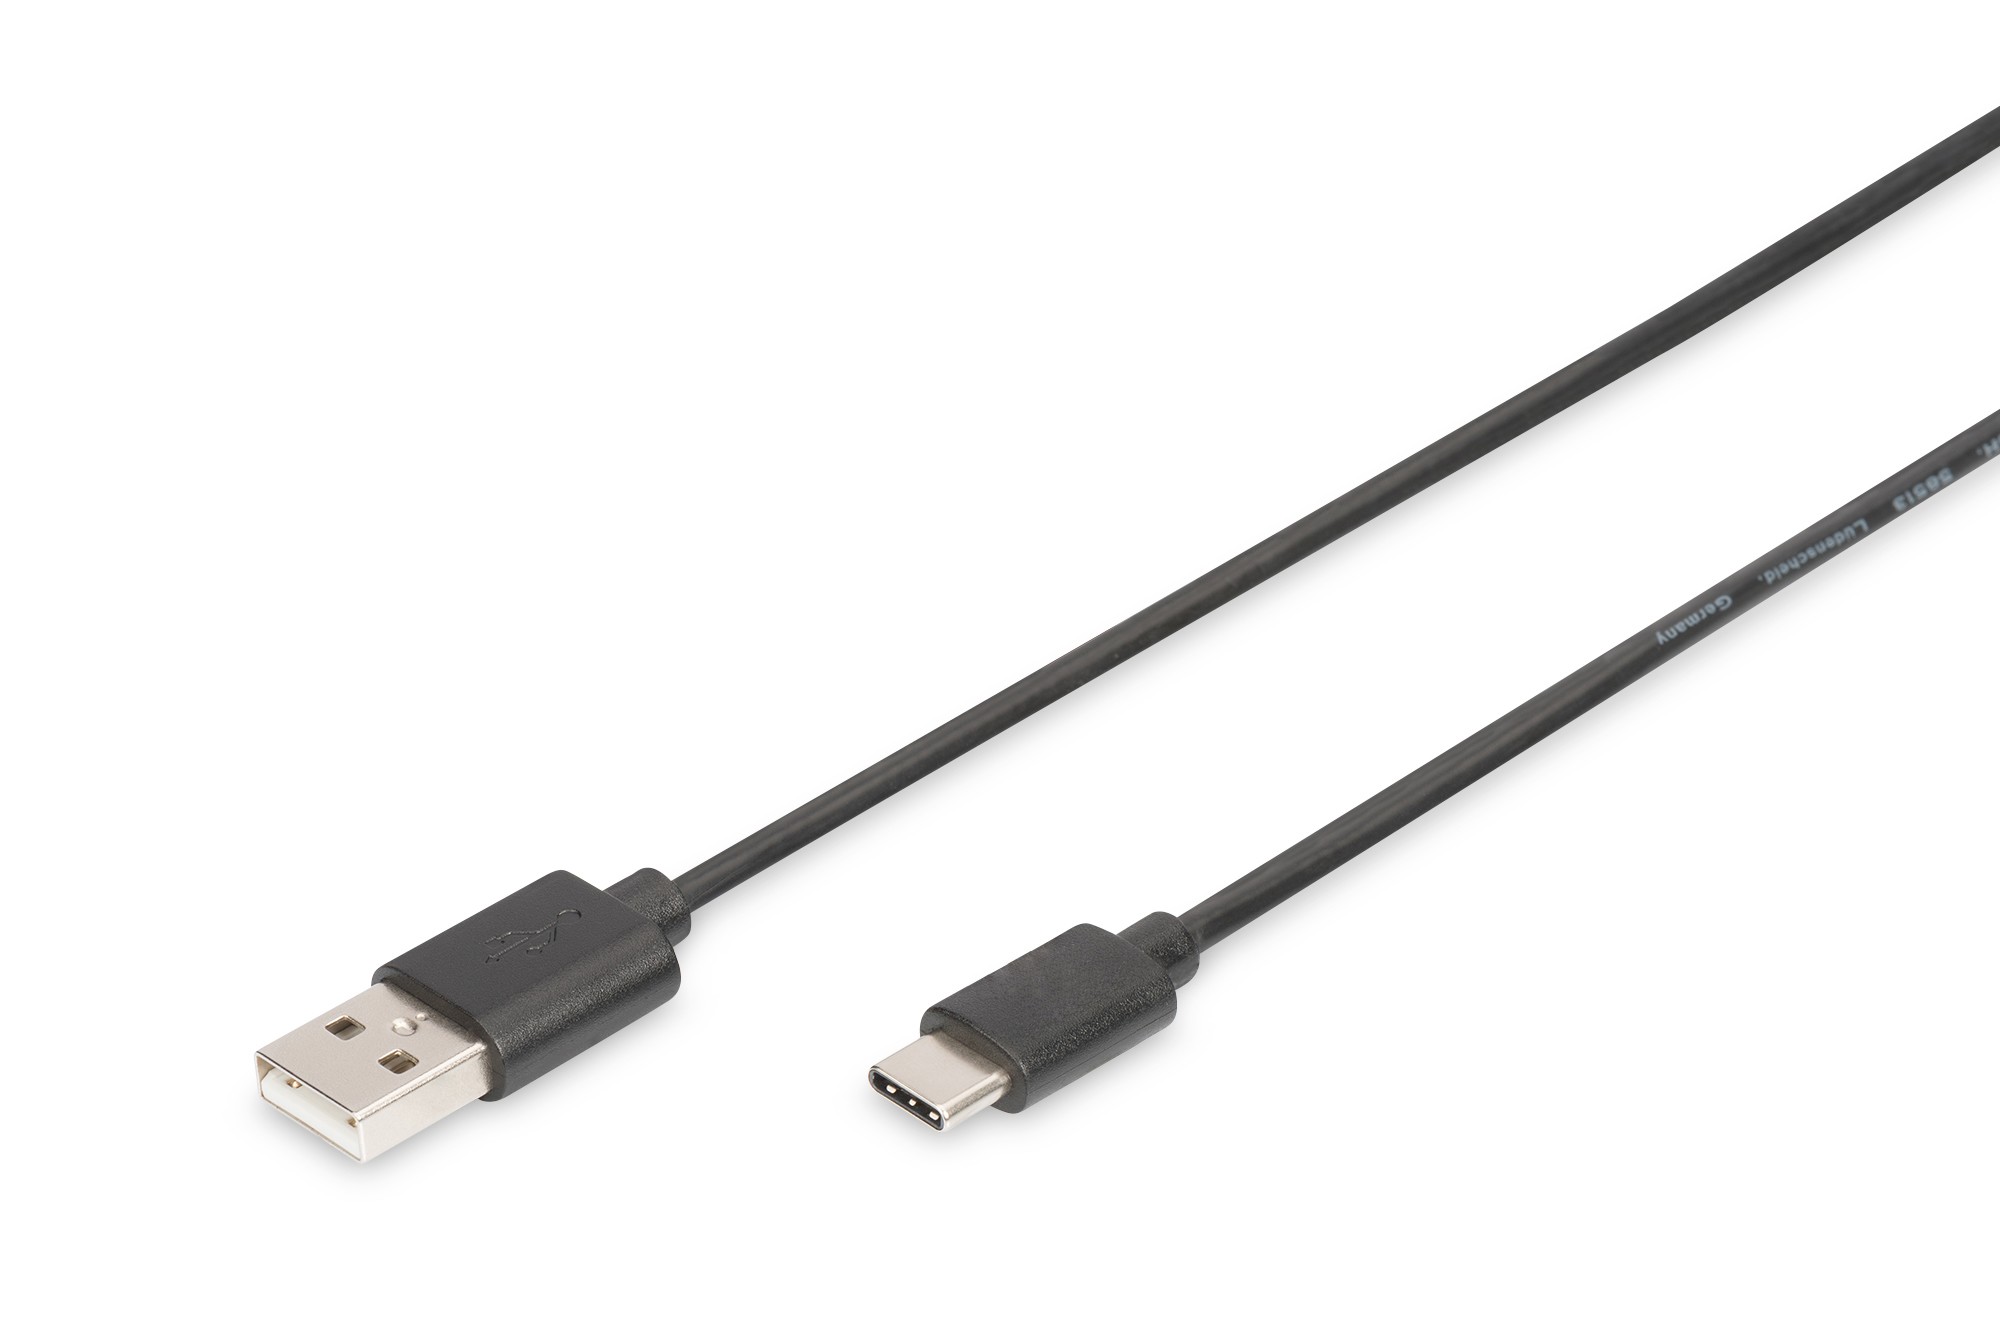 AK-300154-018-S  USB Type-C connection cable, type C to A M/M, 1.8m, 3A, 480MB, 2.0 Version, bl